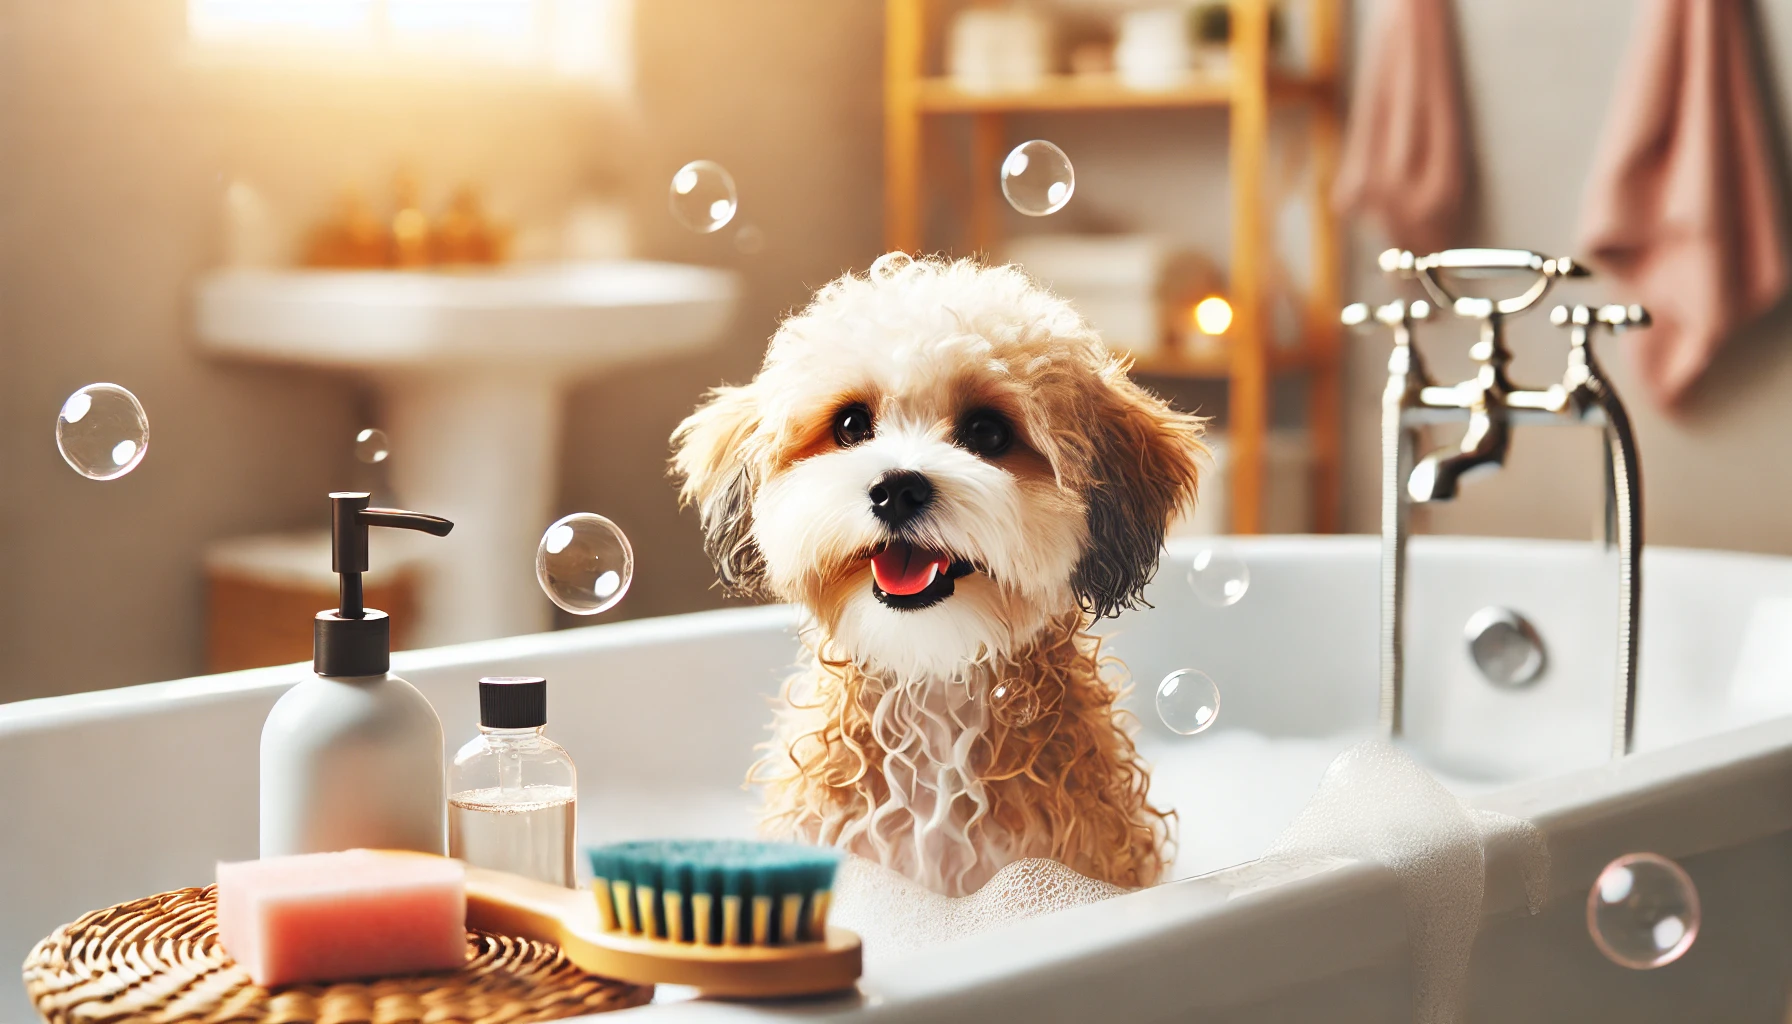 image of a small Maltipoo in a bathtub getting a bath. The dog looks happy and content, with bubbles and water around it